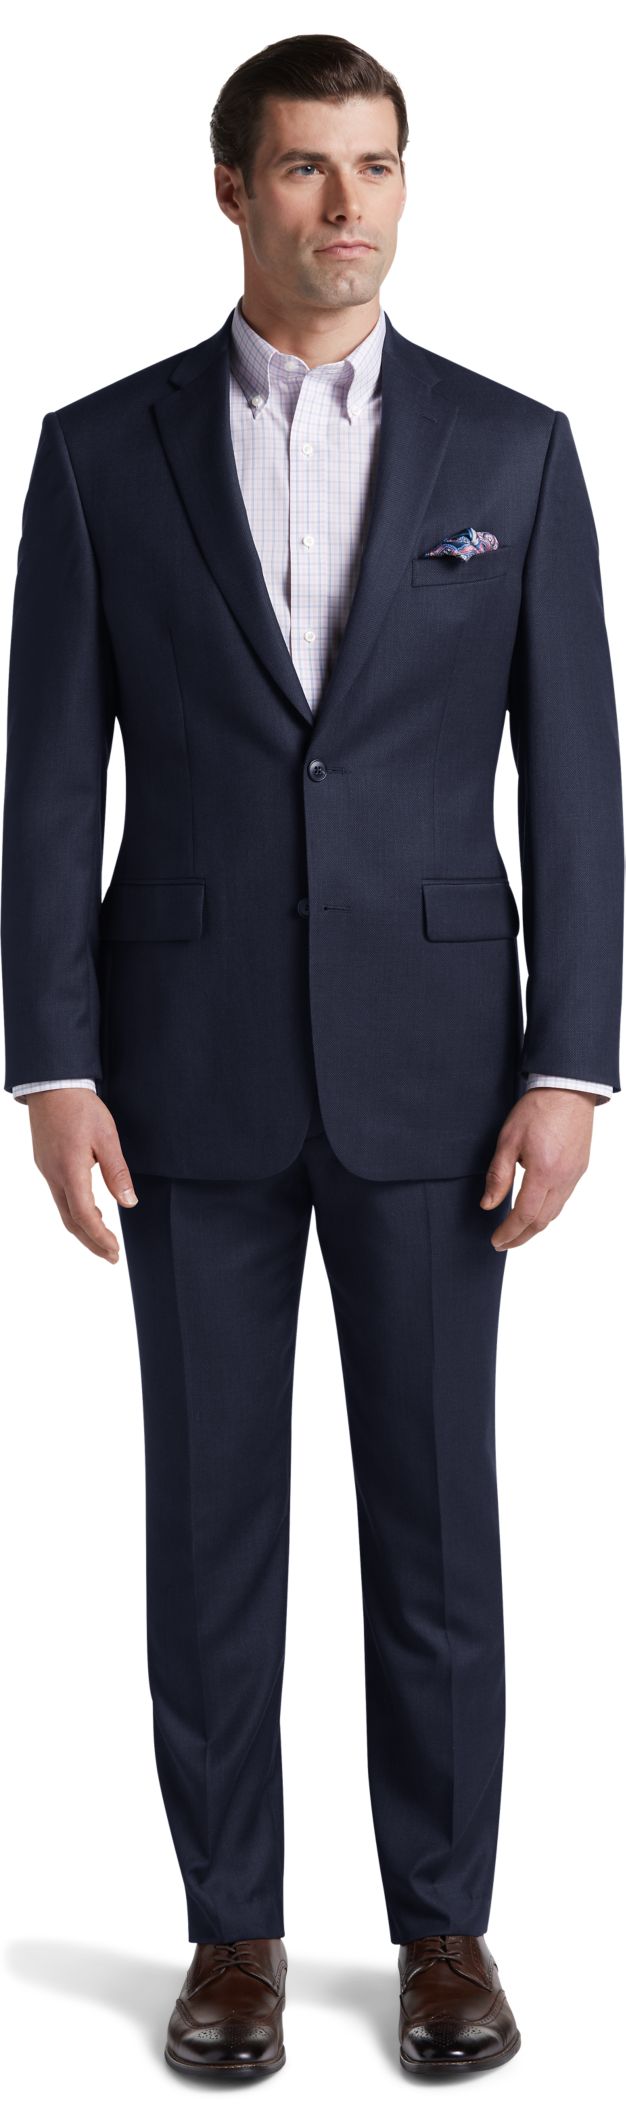 Traveler Collection Tailored Fit Suit - Traveler Suits | Jos A Bank